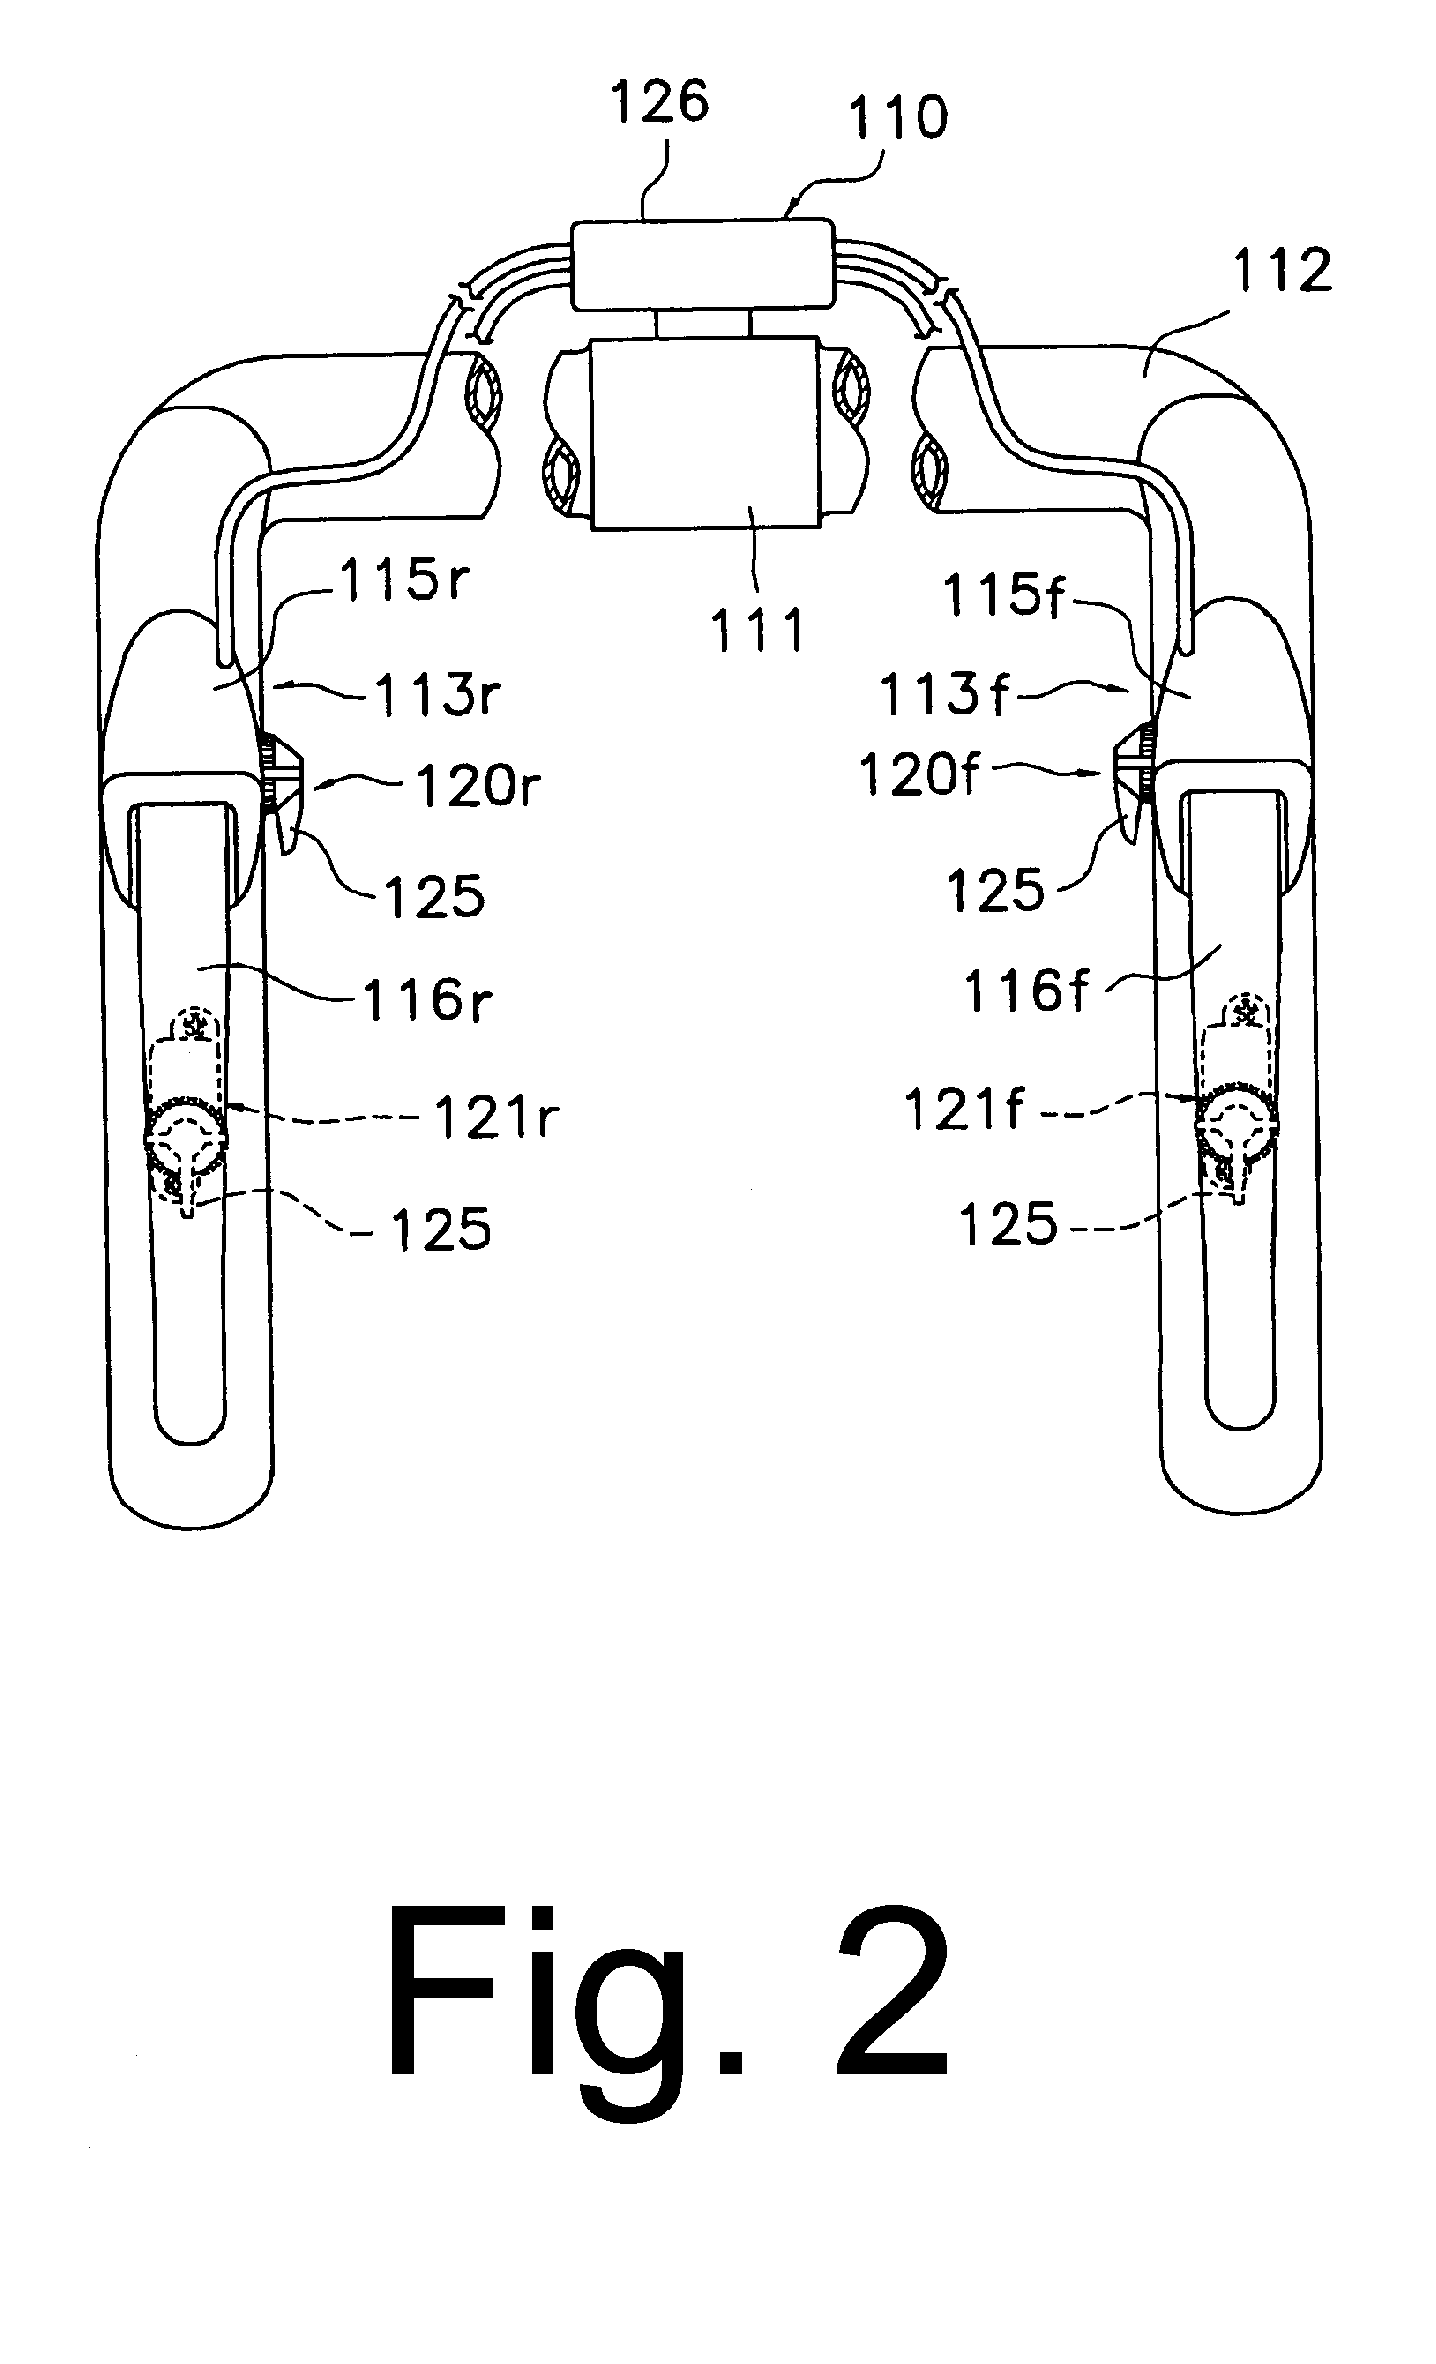 Apparatus for adjusting a position of a bicycle derailleur